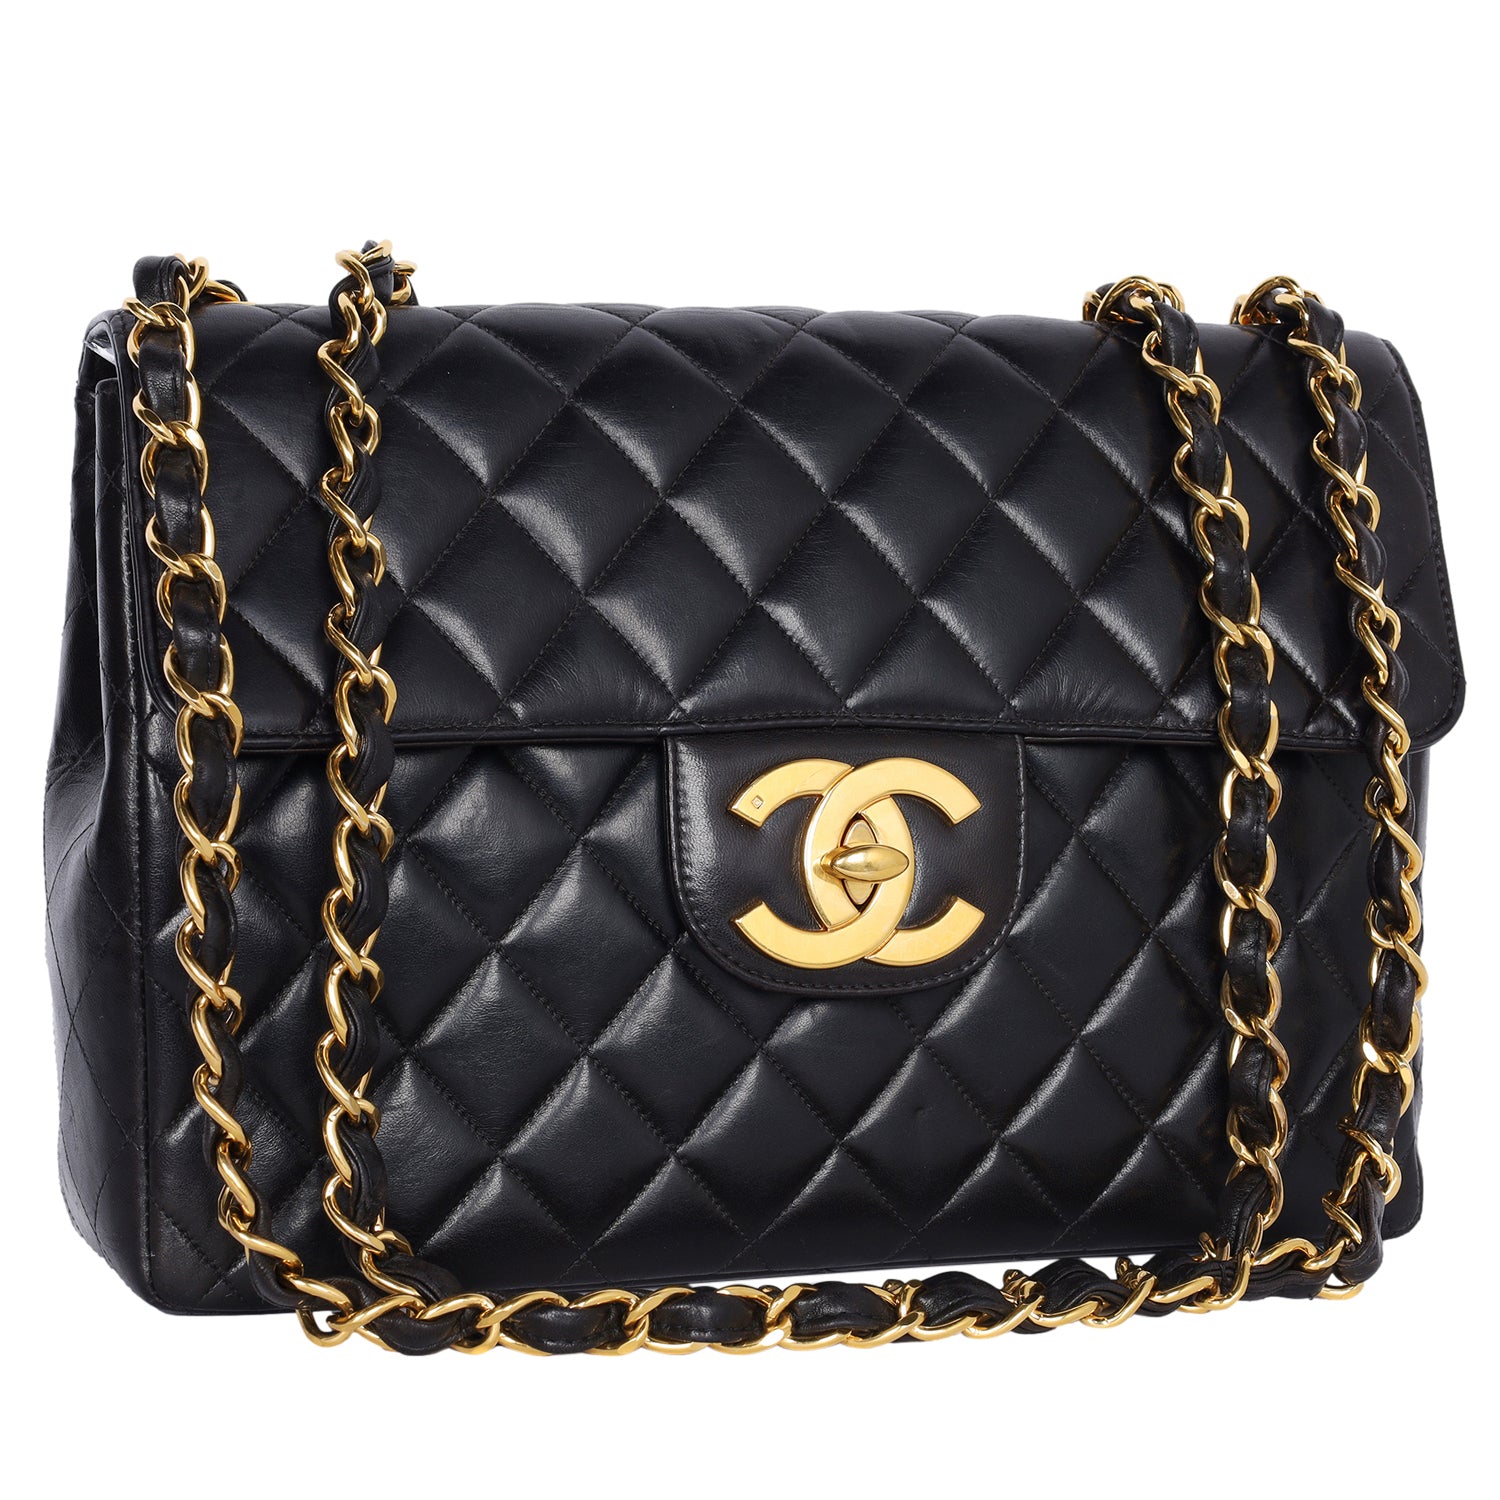 From One Newbie to Another How To Buy Your First Chanel Bag